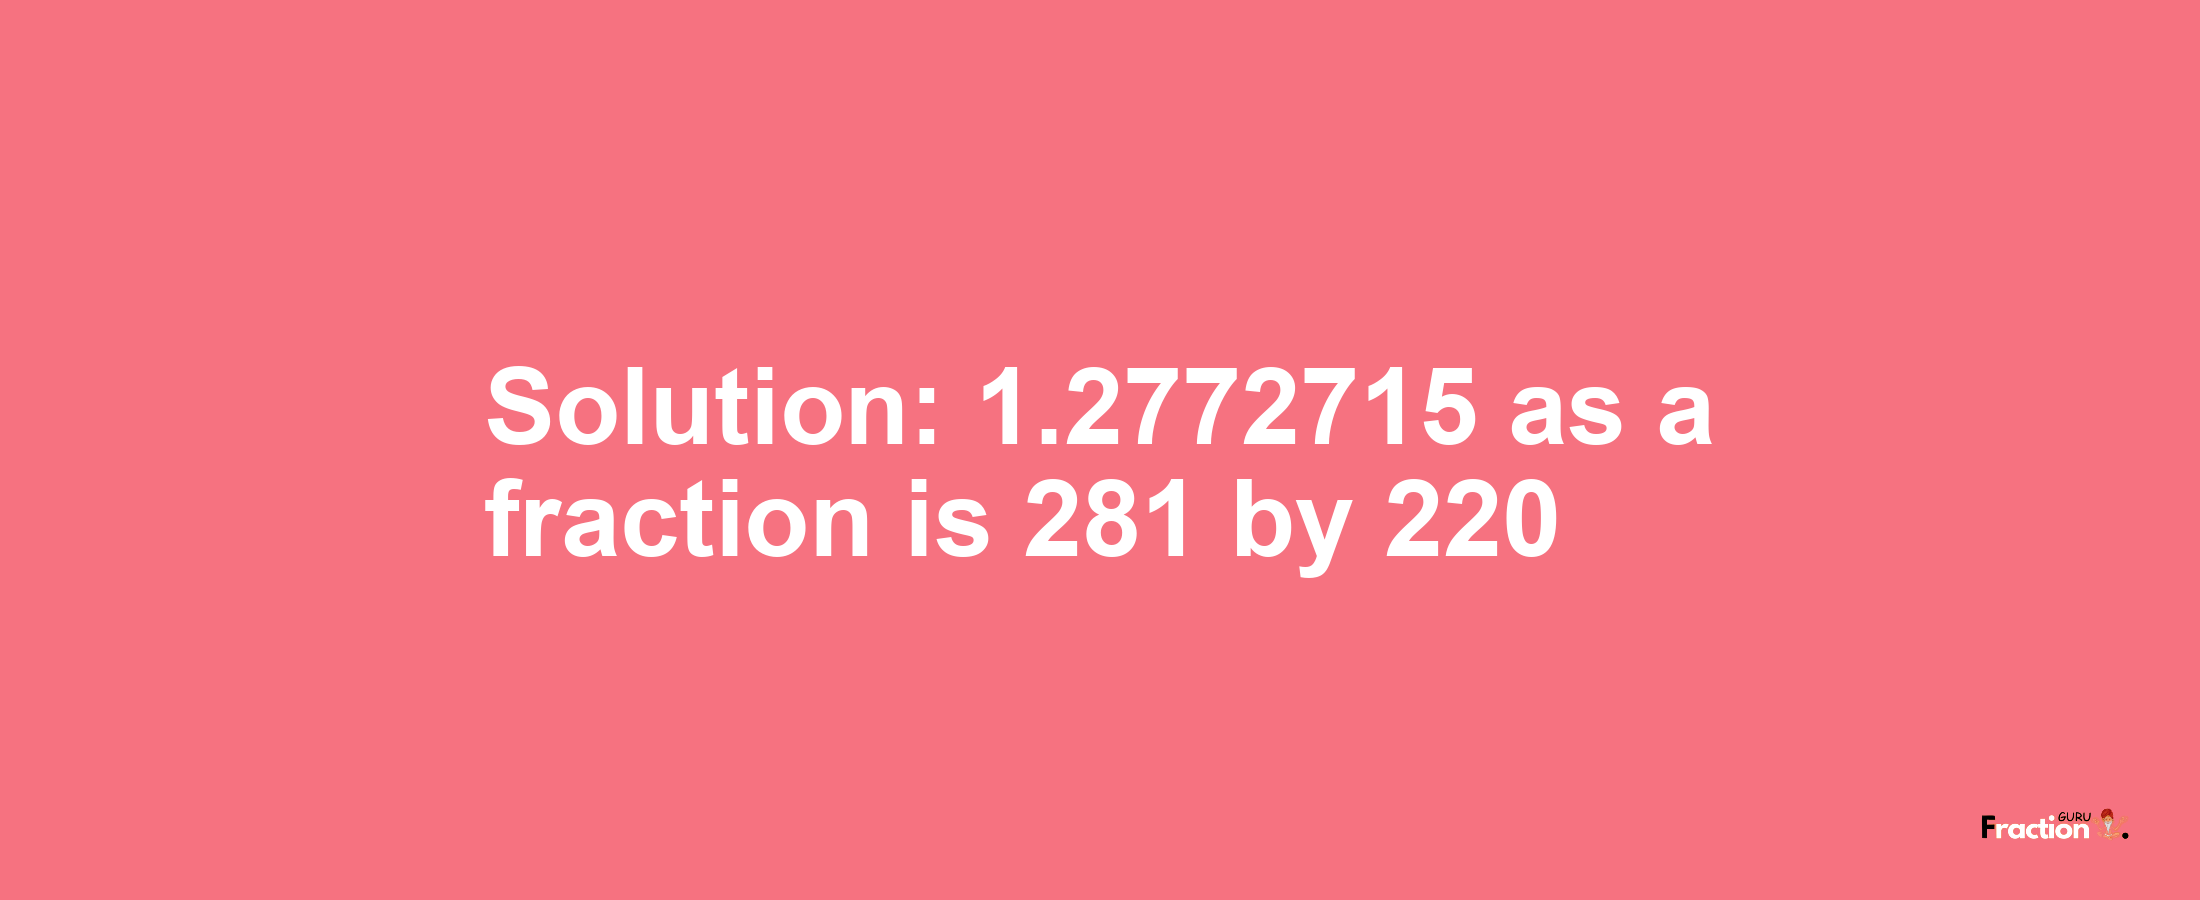 Solution:1.2772715 as a fraction is 281/220